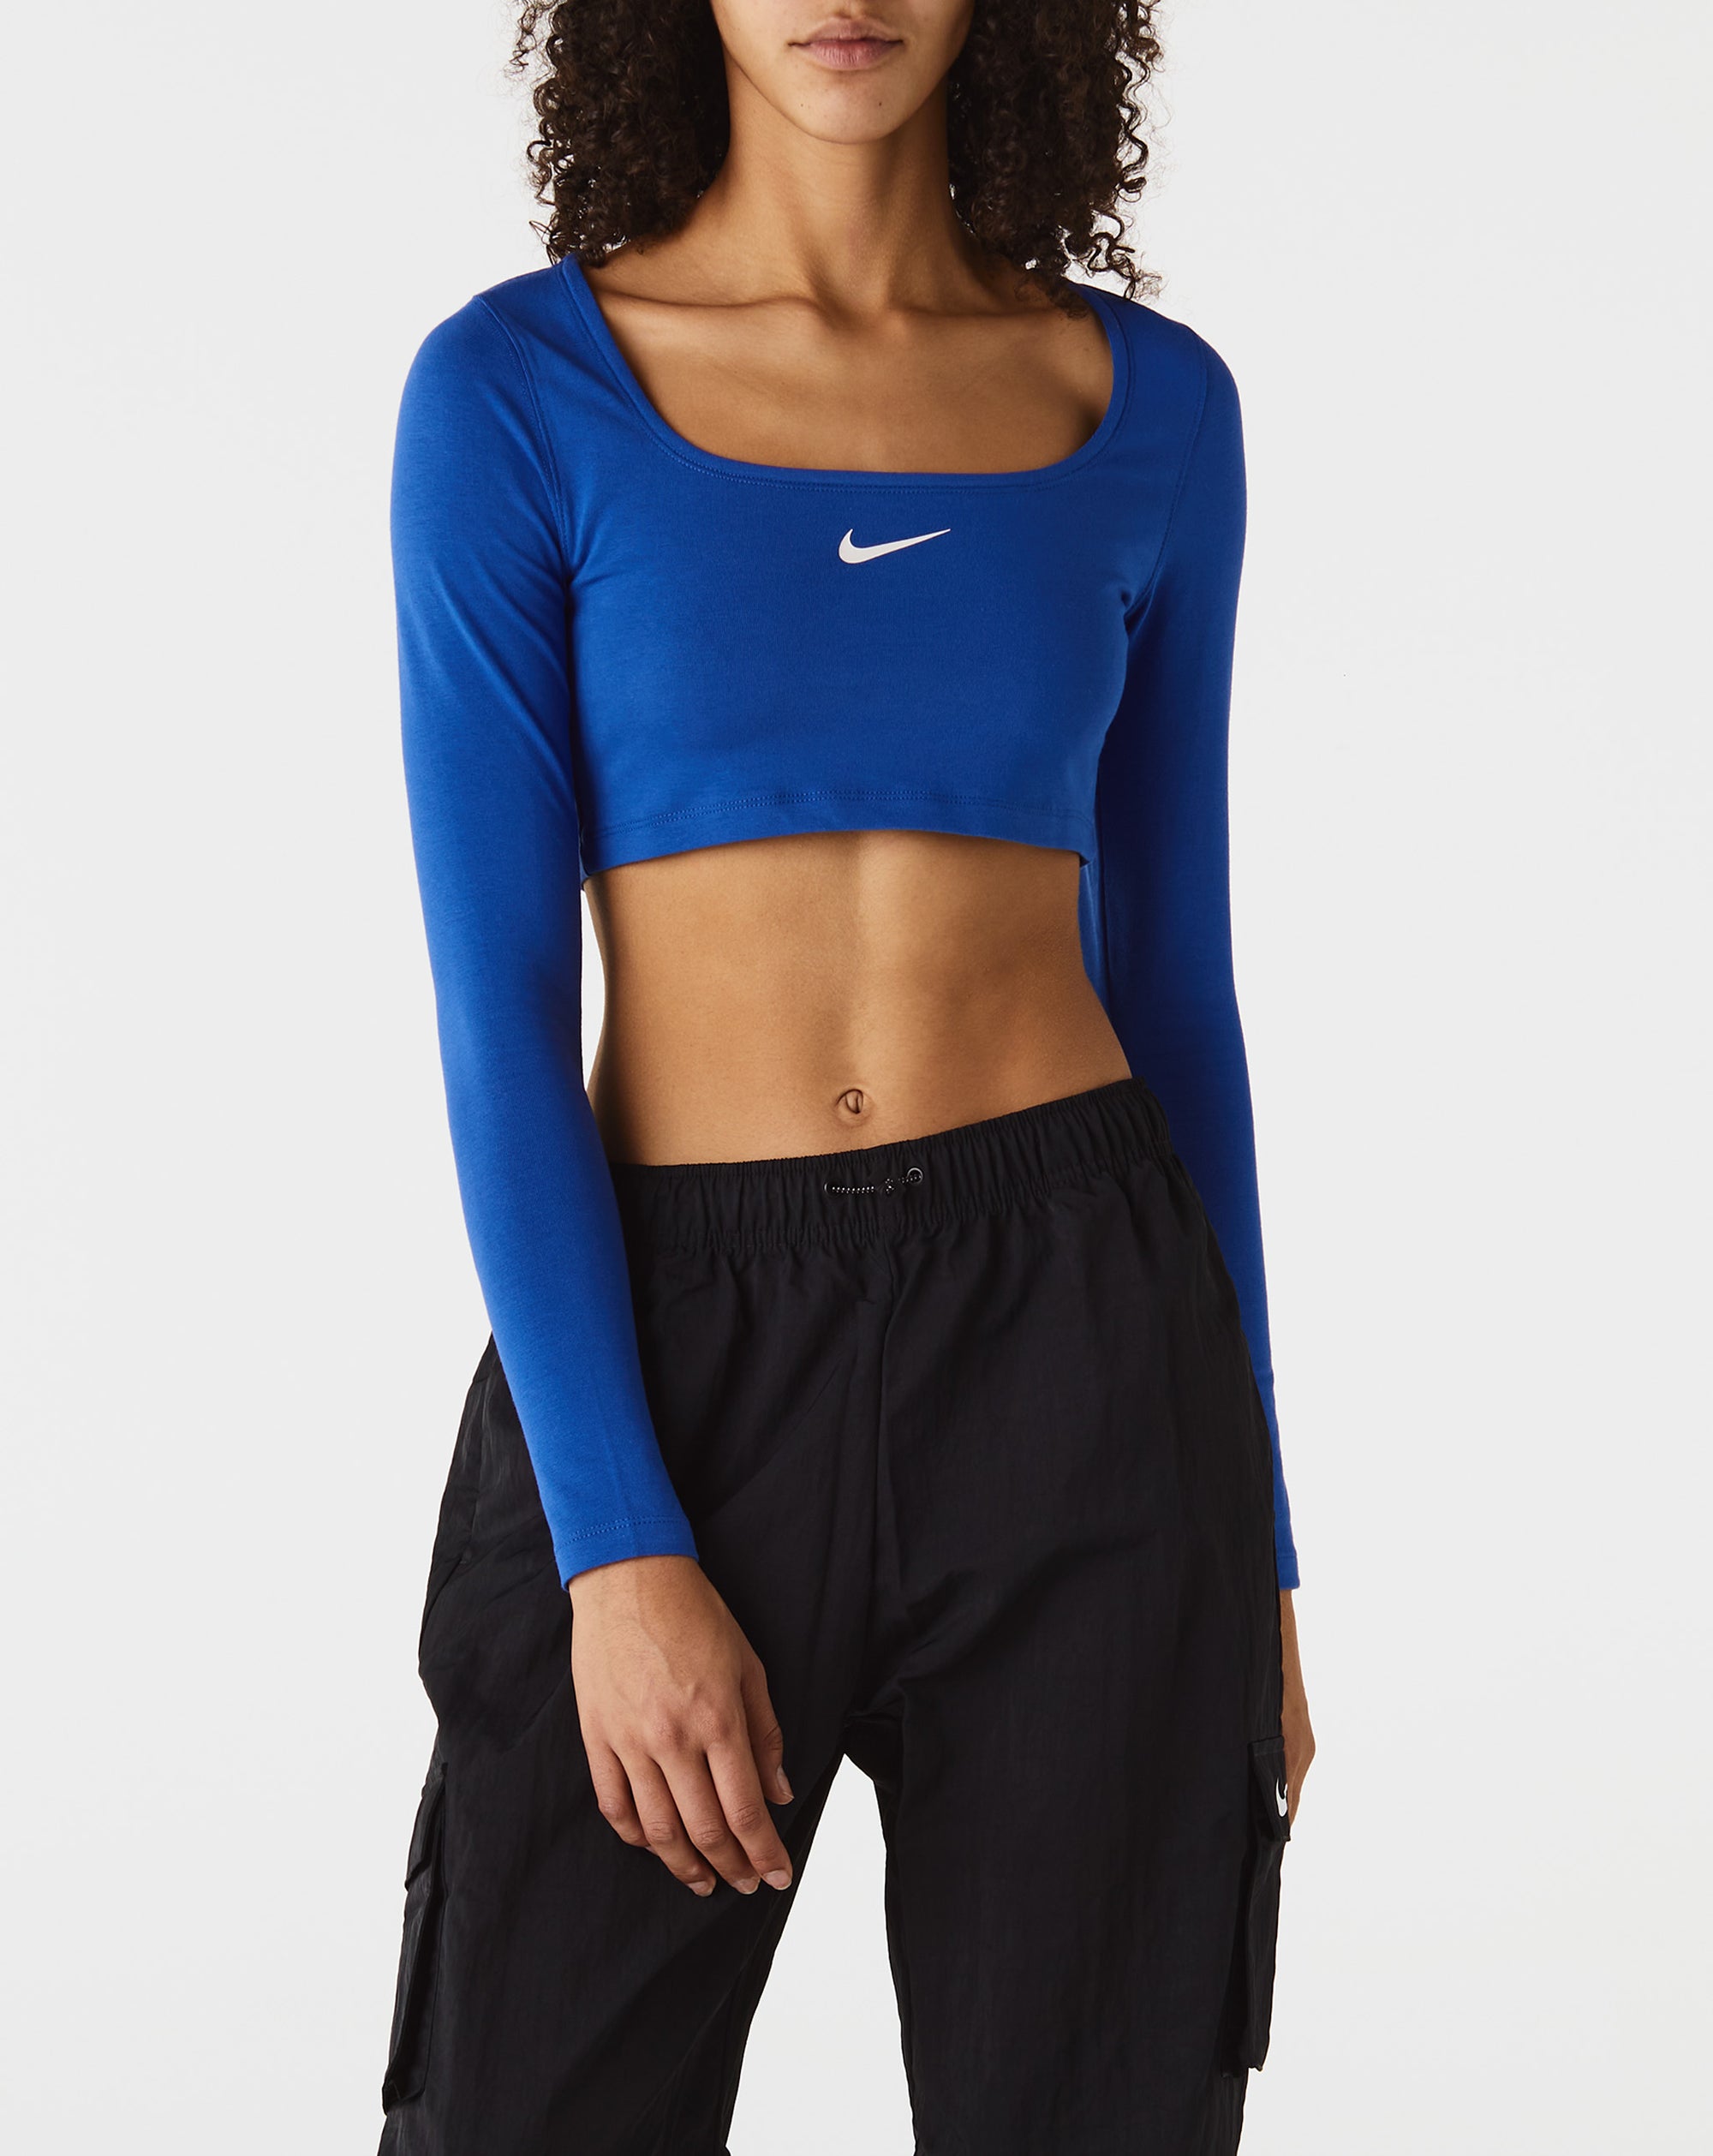 Nike Women's NSW Cropped Top - Rule of Next Apparel